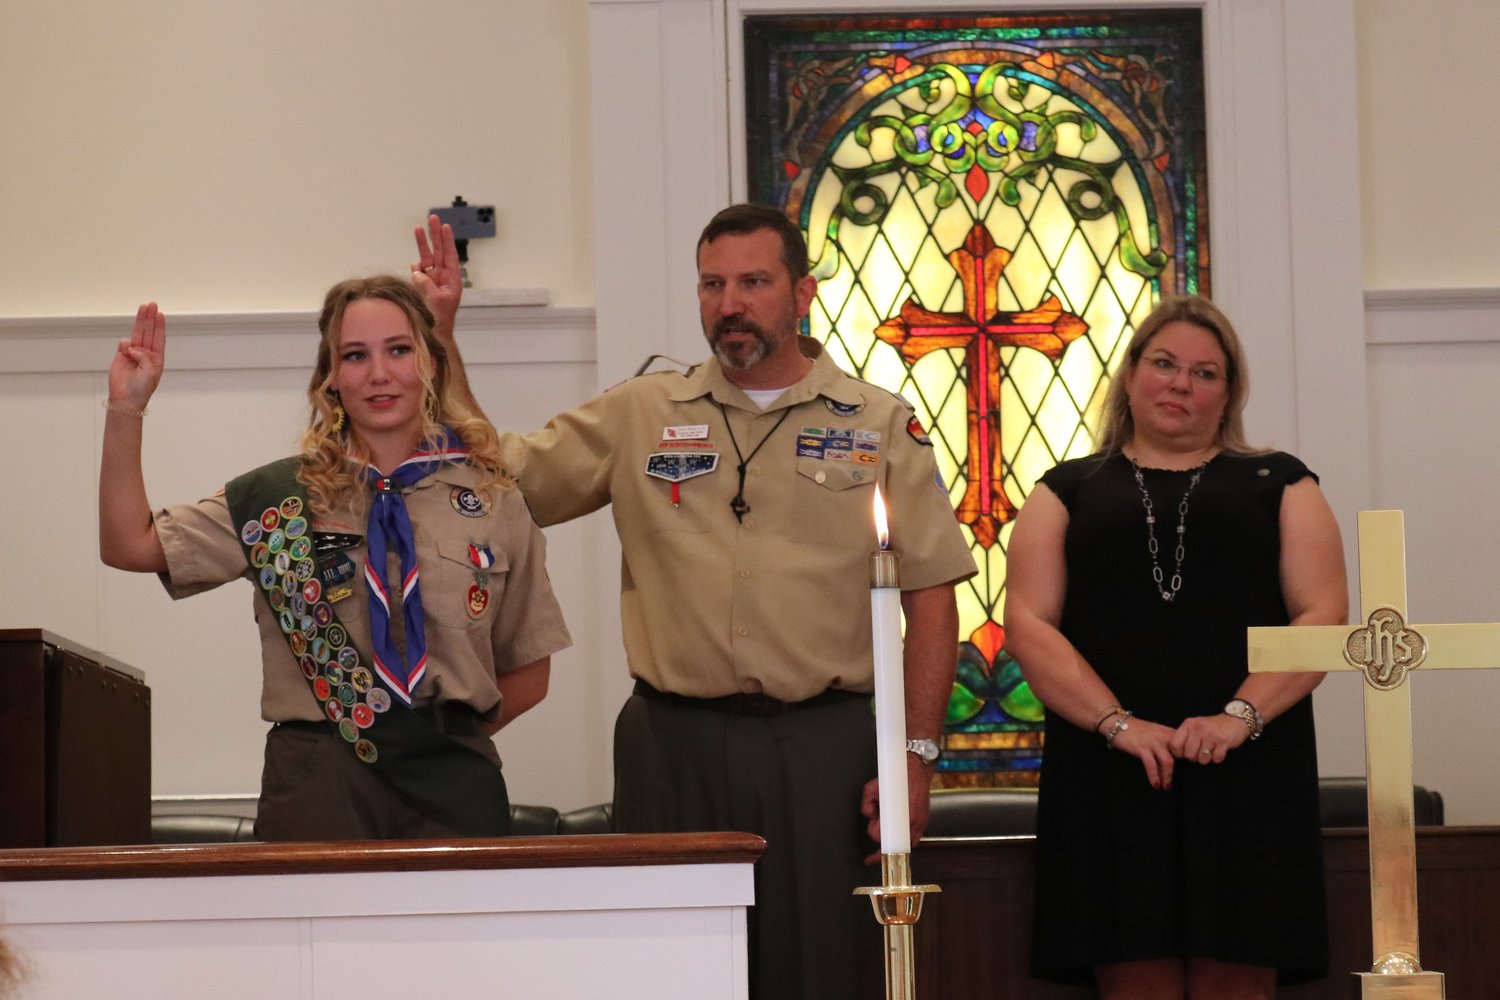 New Eagle Scout Dorothy Myers and her father John recite the Eagle Scout Charge, along with the other Eagle Scouts attending the Court of Honor ceremony.